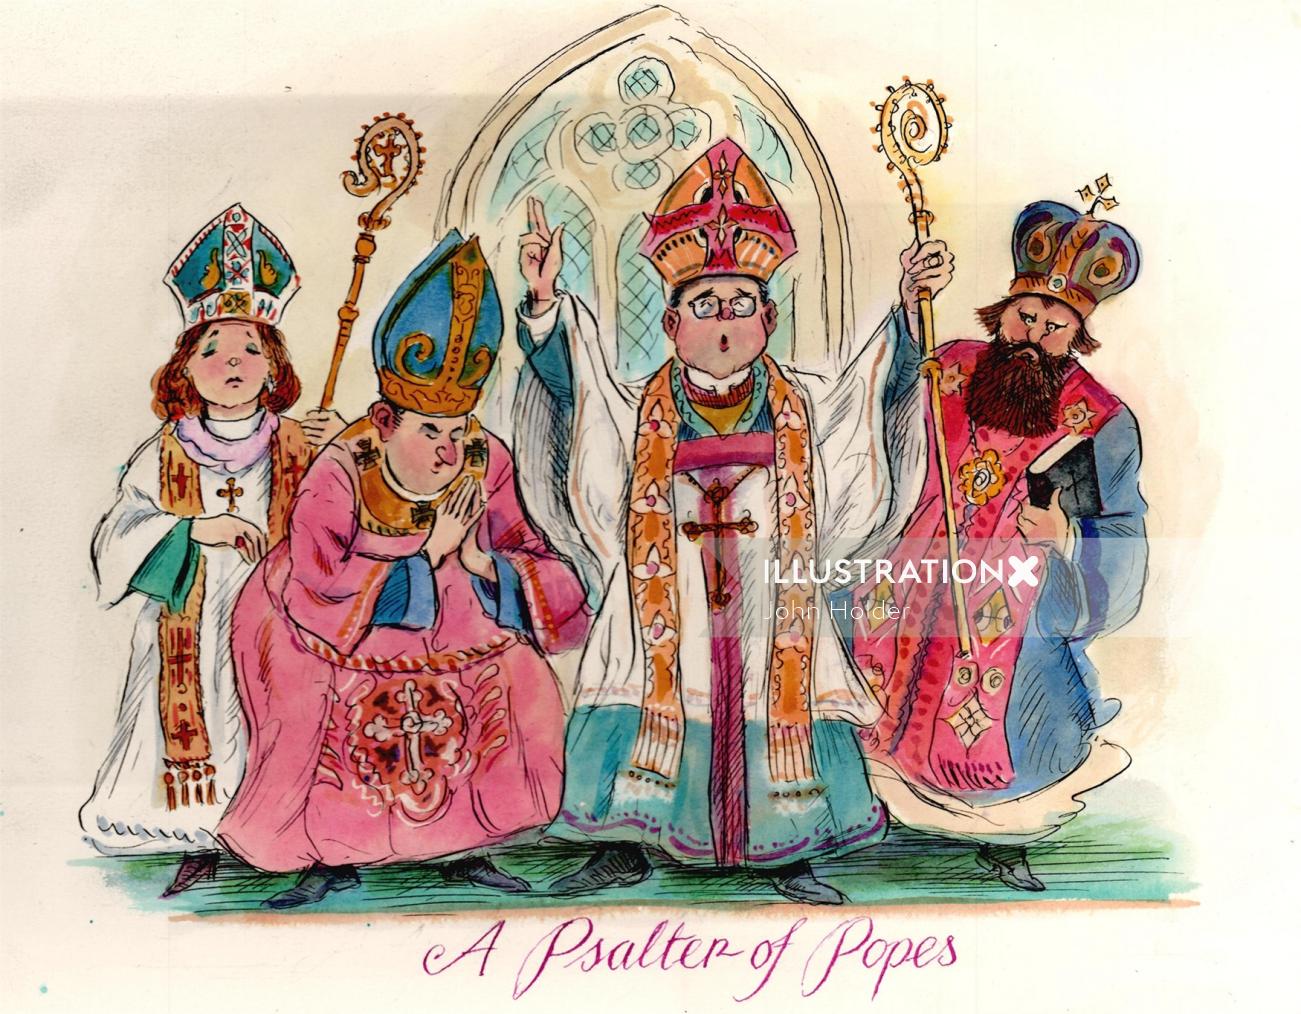 Cartoon & Humour A Psalter of Popes storybook painting